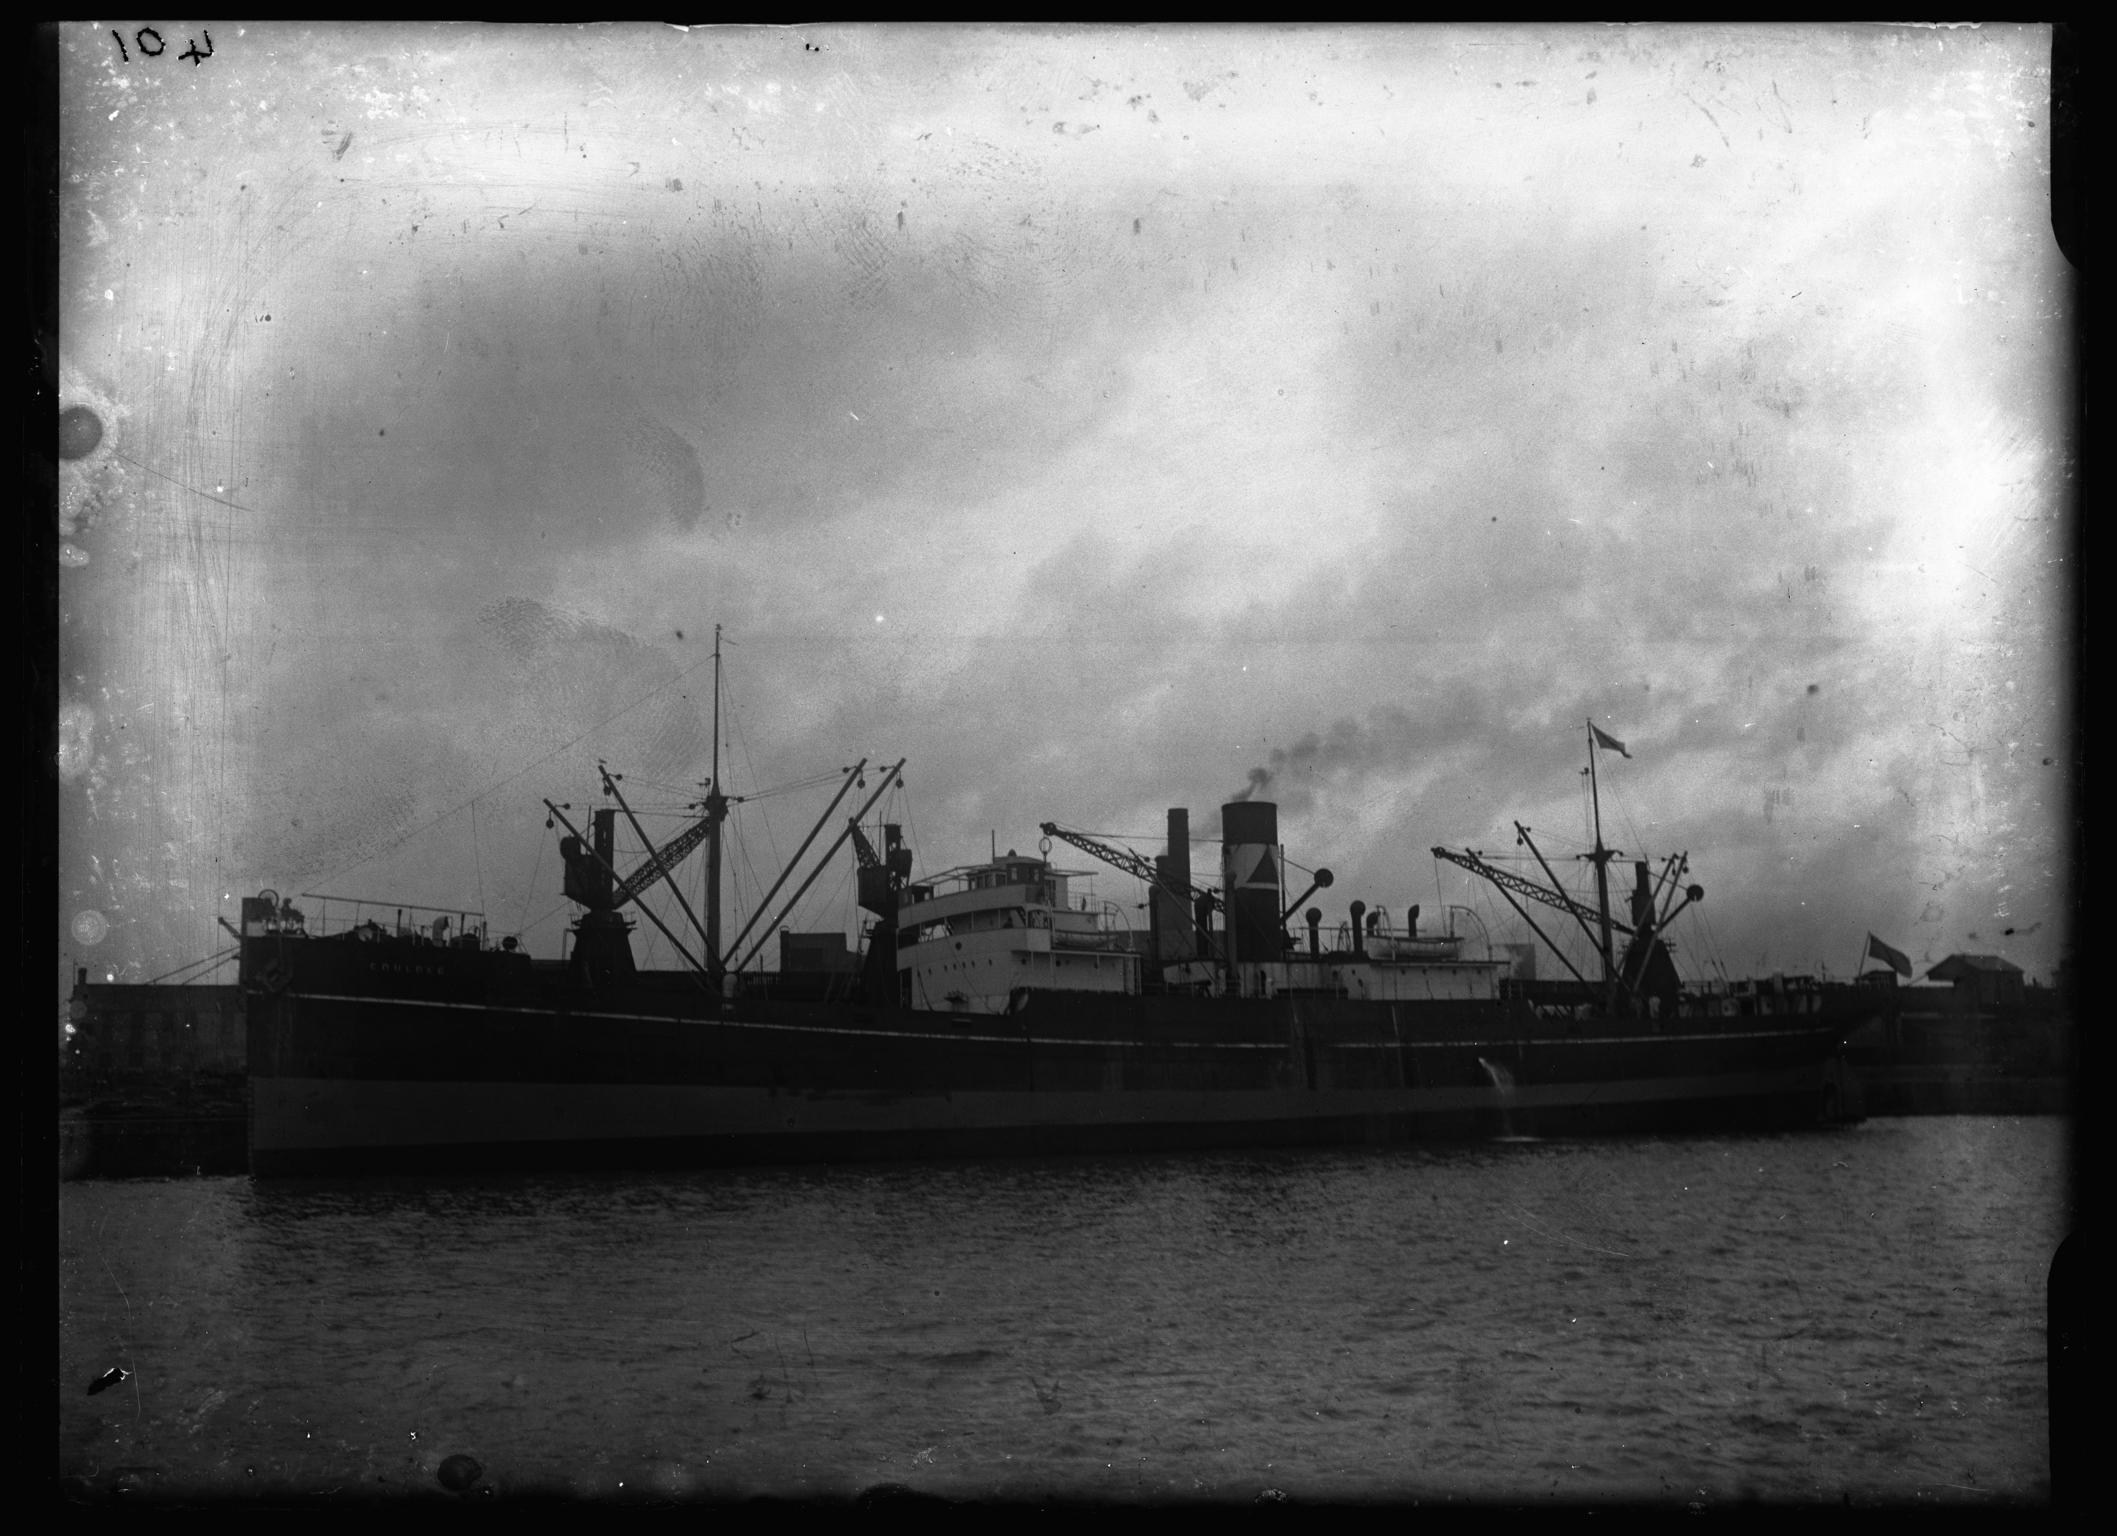 S.S. COULBEG, glass negative